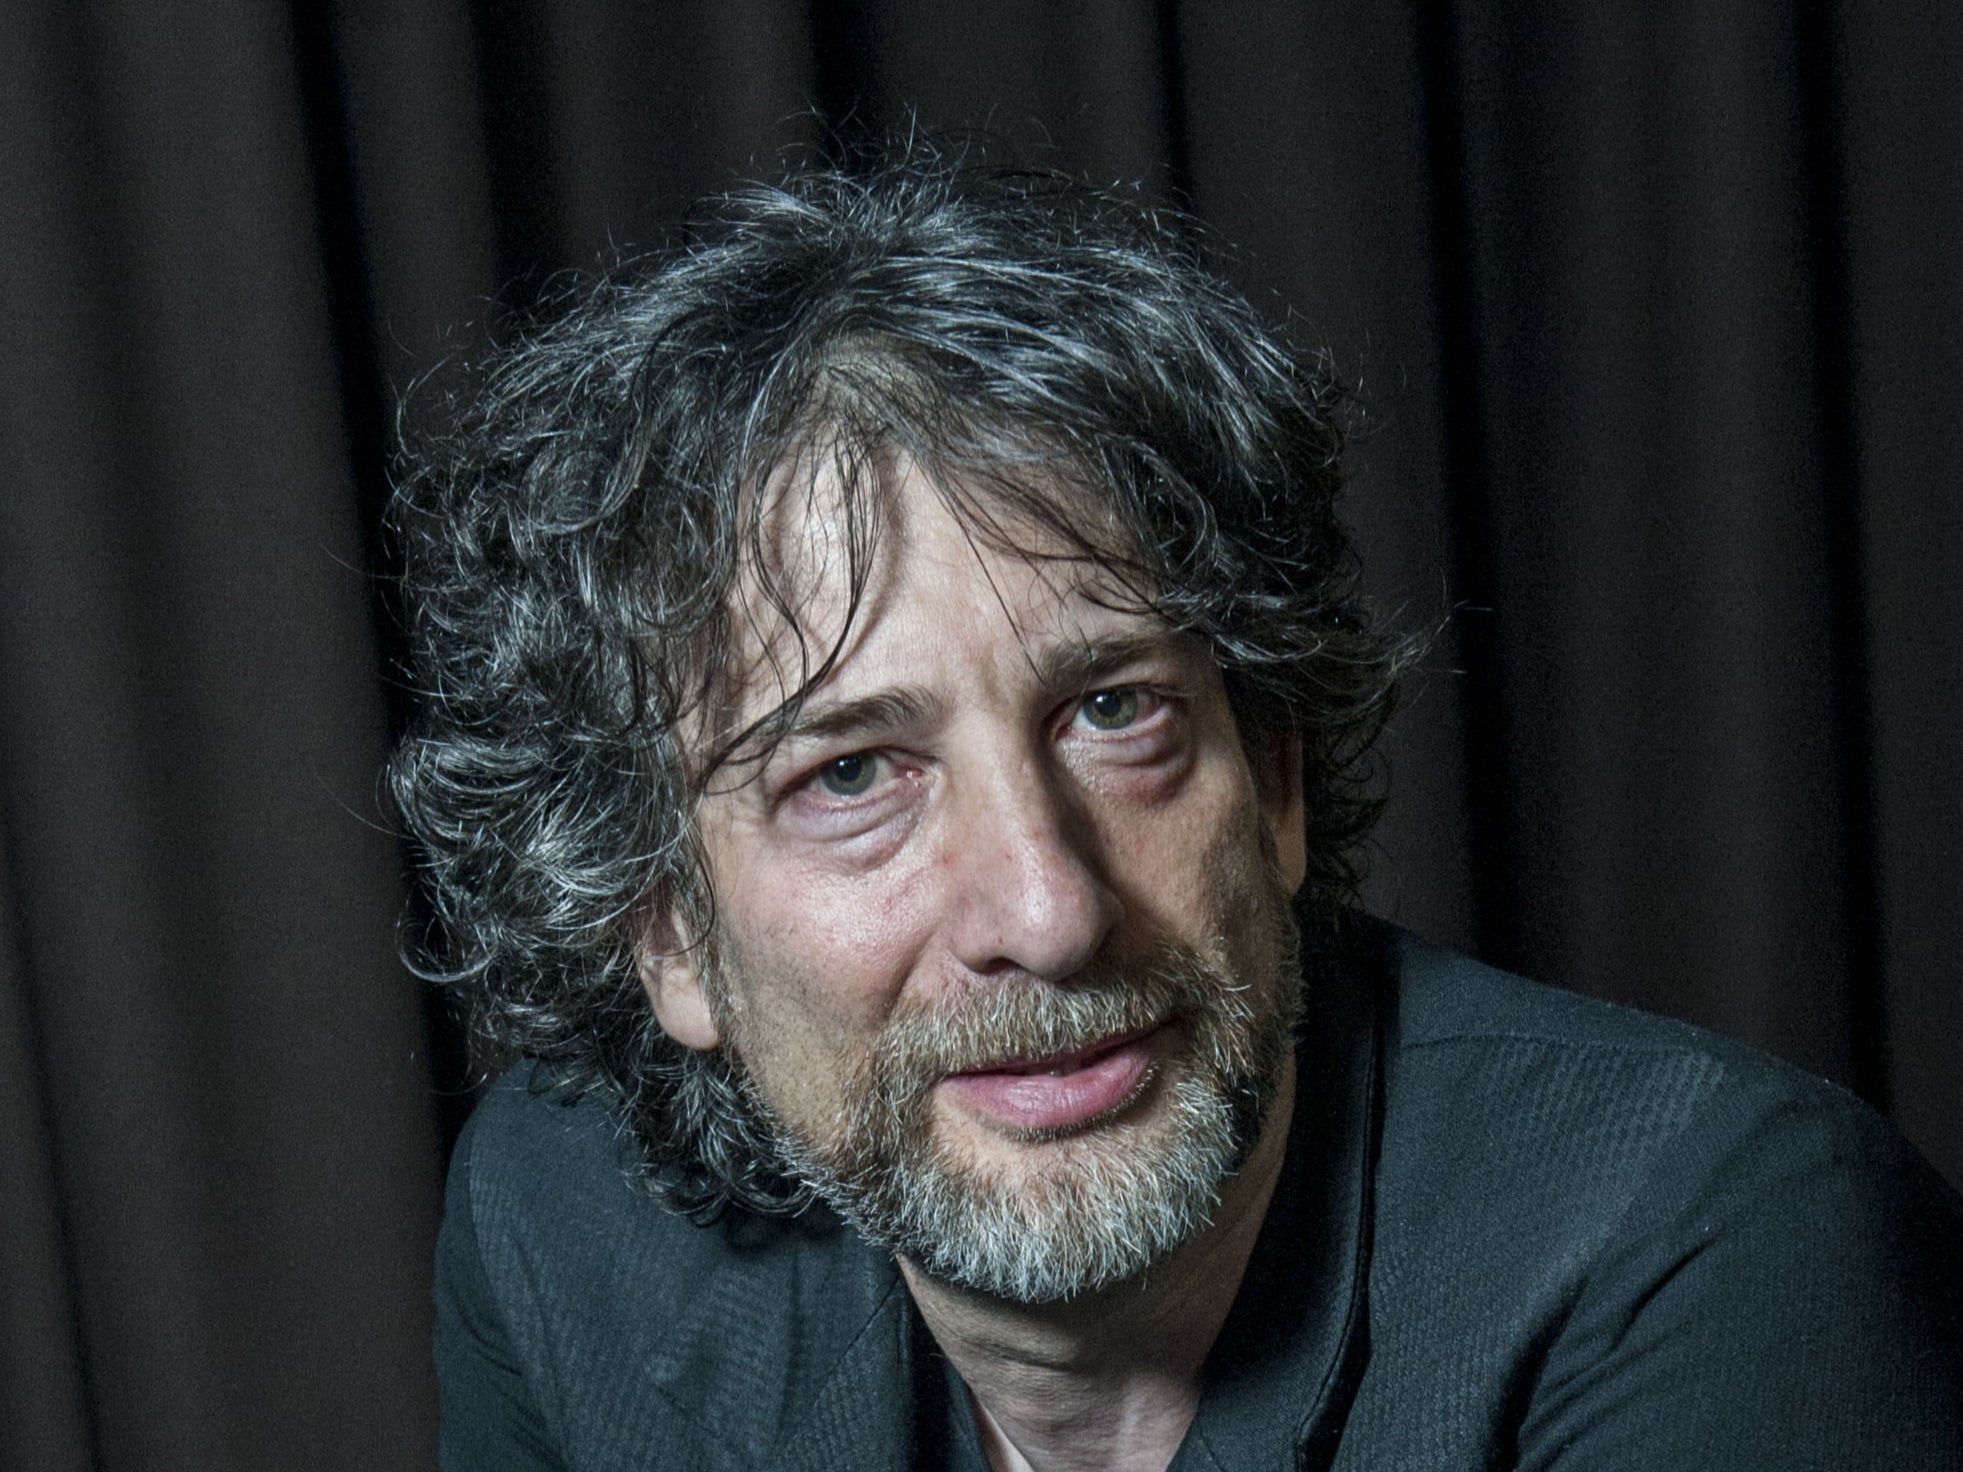 ‘I really was so upset I had upset everybody;’ Neil Gaiman on finding himself the subject of tabloid scrutiny earlier this year